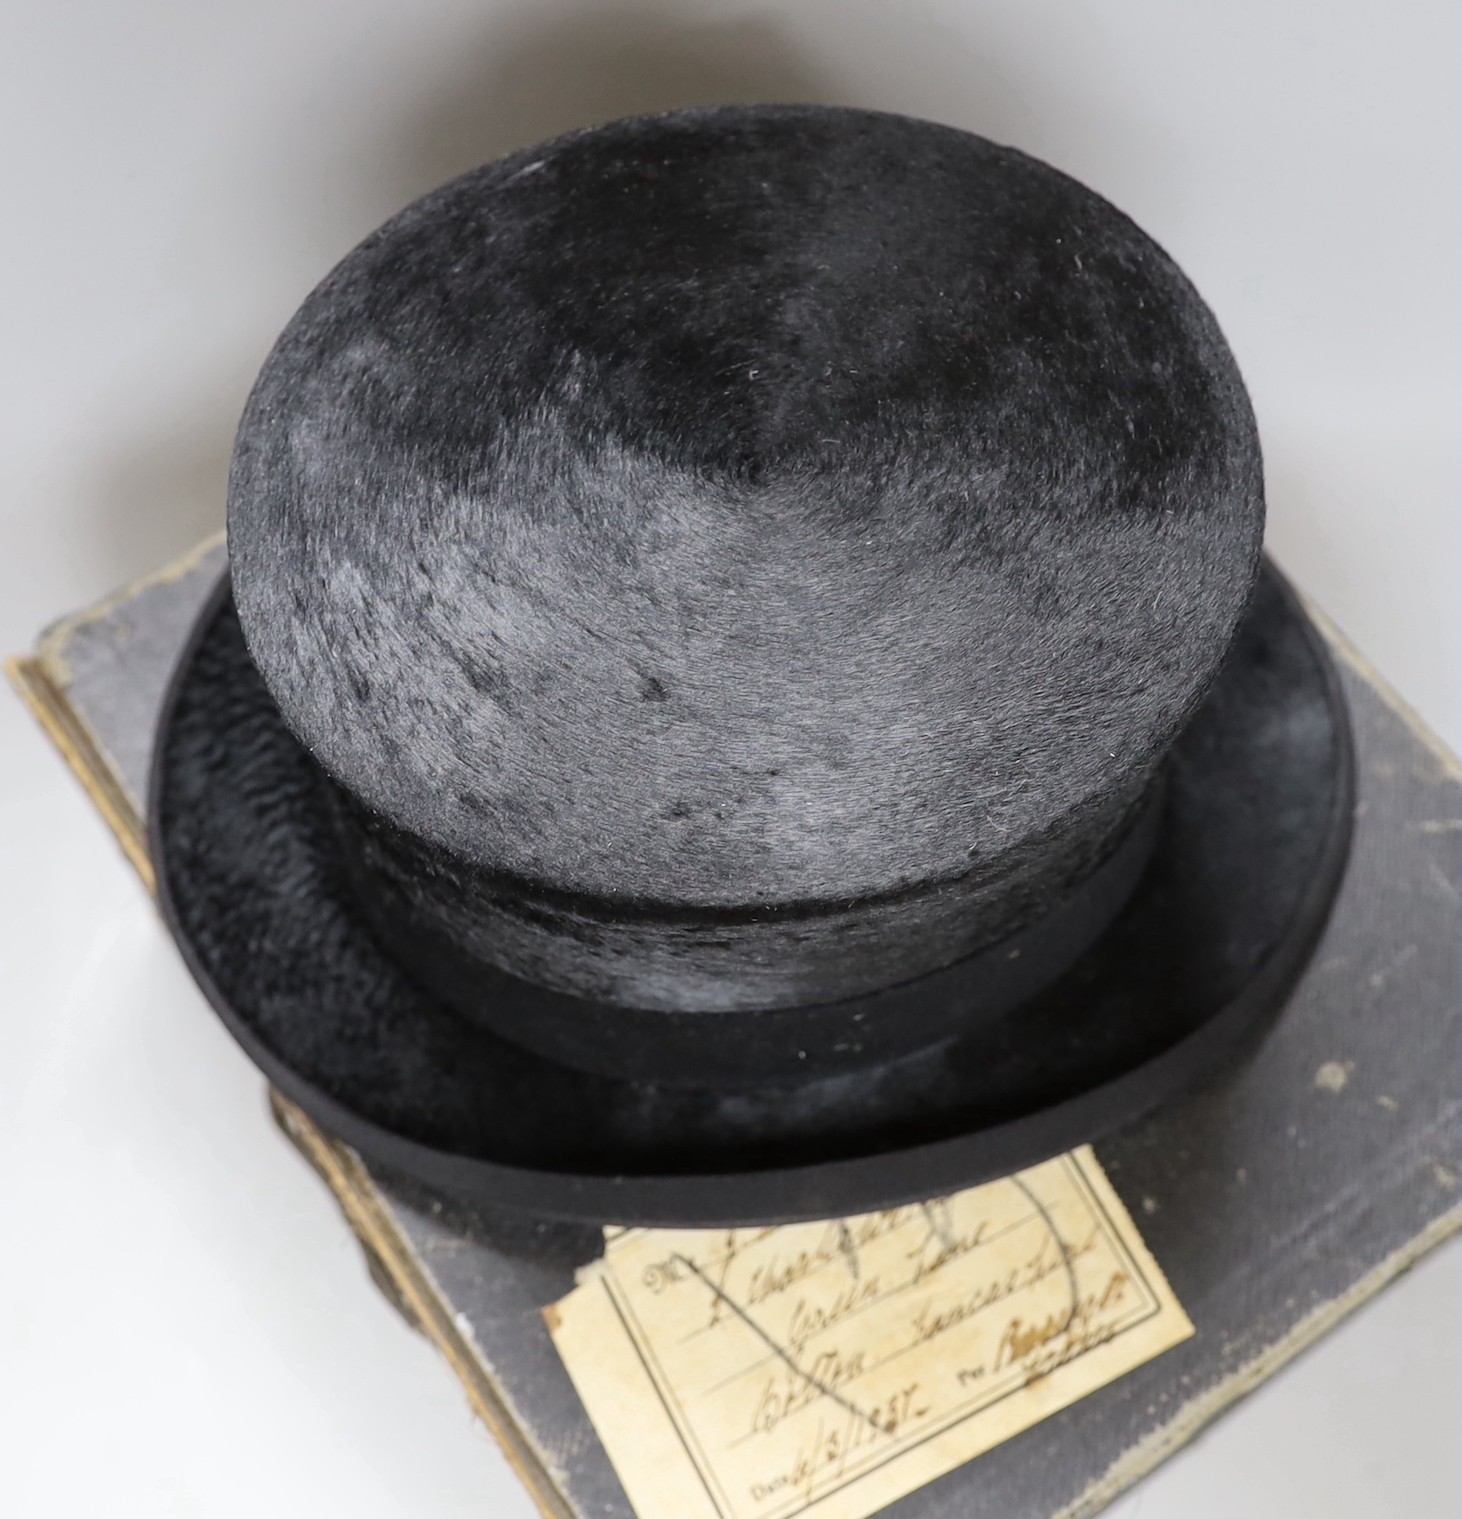 A boxed gentleman's black top hat, by Royal appointment: Woodrow, 45 Gordon St. Glasgow